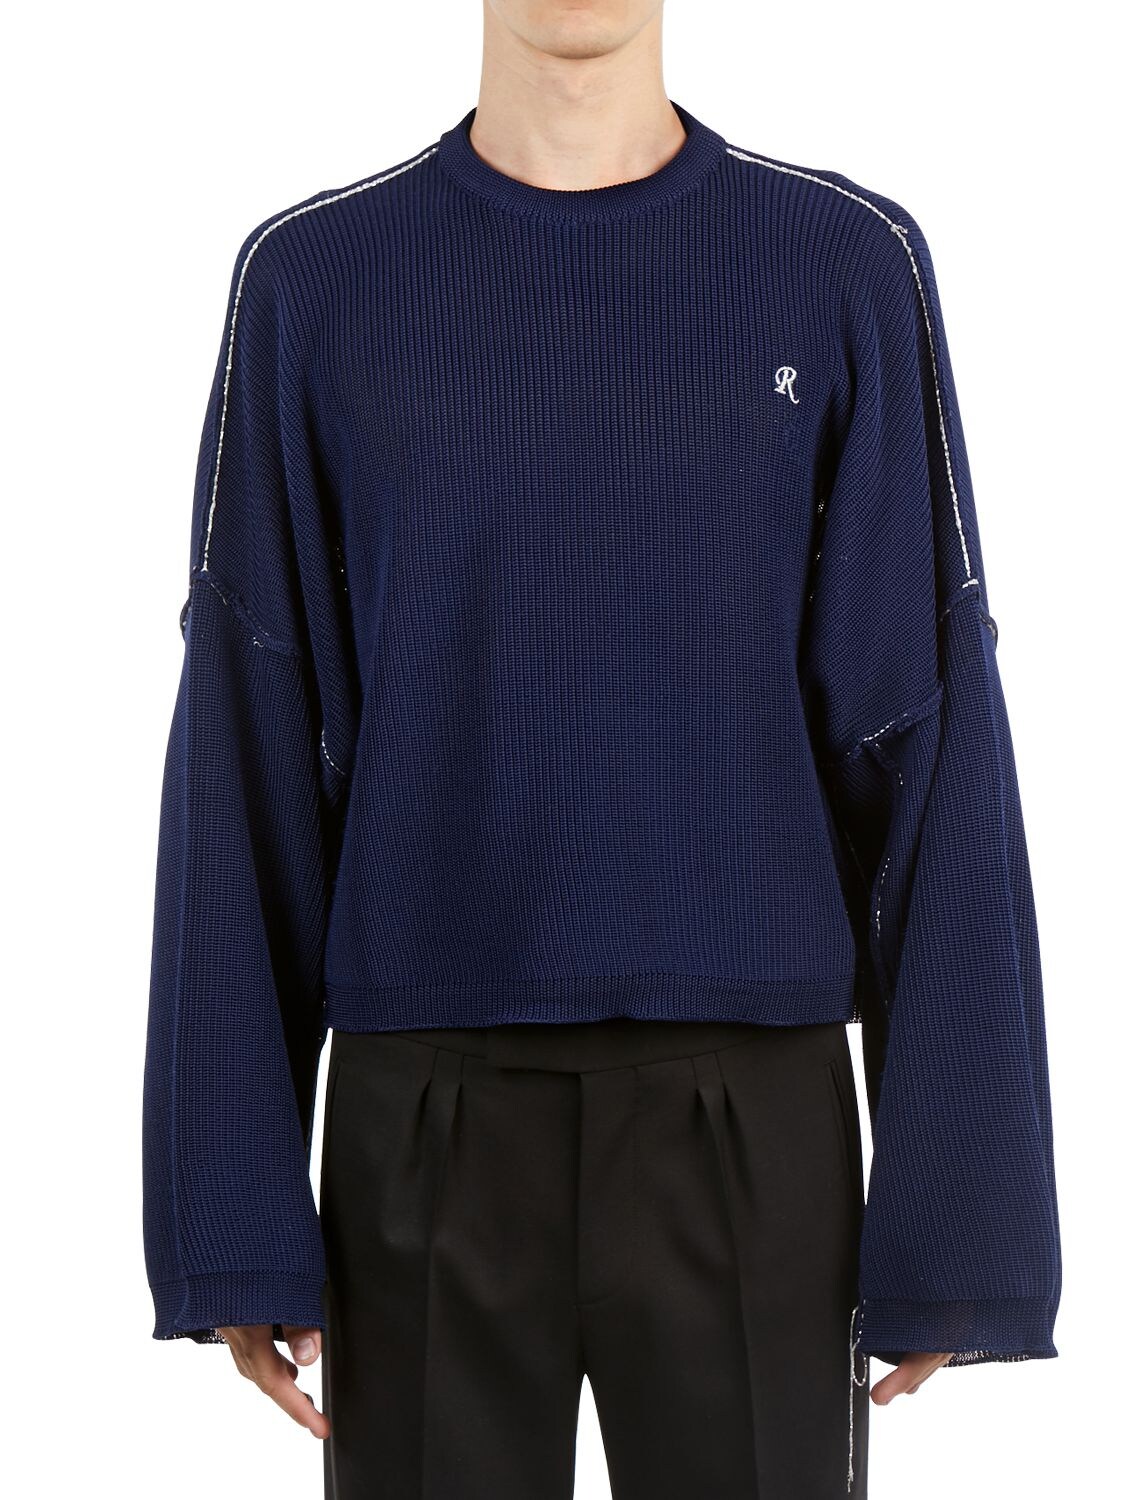 RAF SIMONS EMBROIDERED TECH KNIT CROPPED jumper,69ID0W019-MDAWNDK1